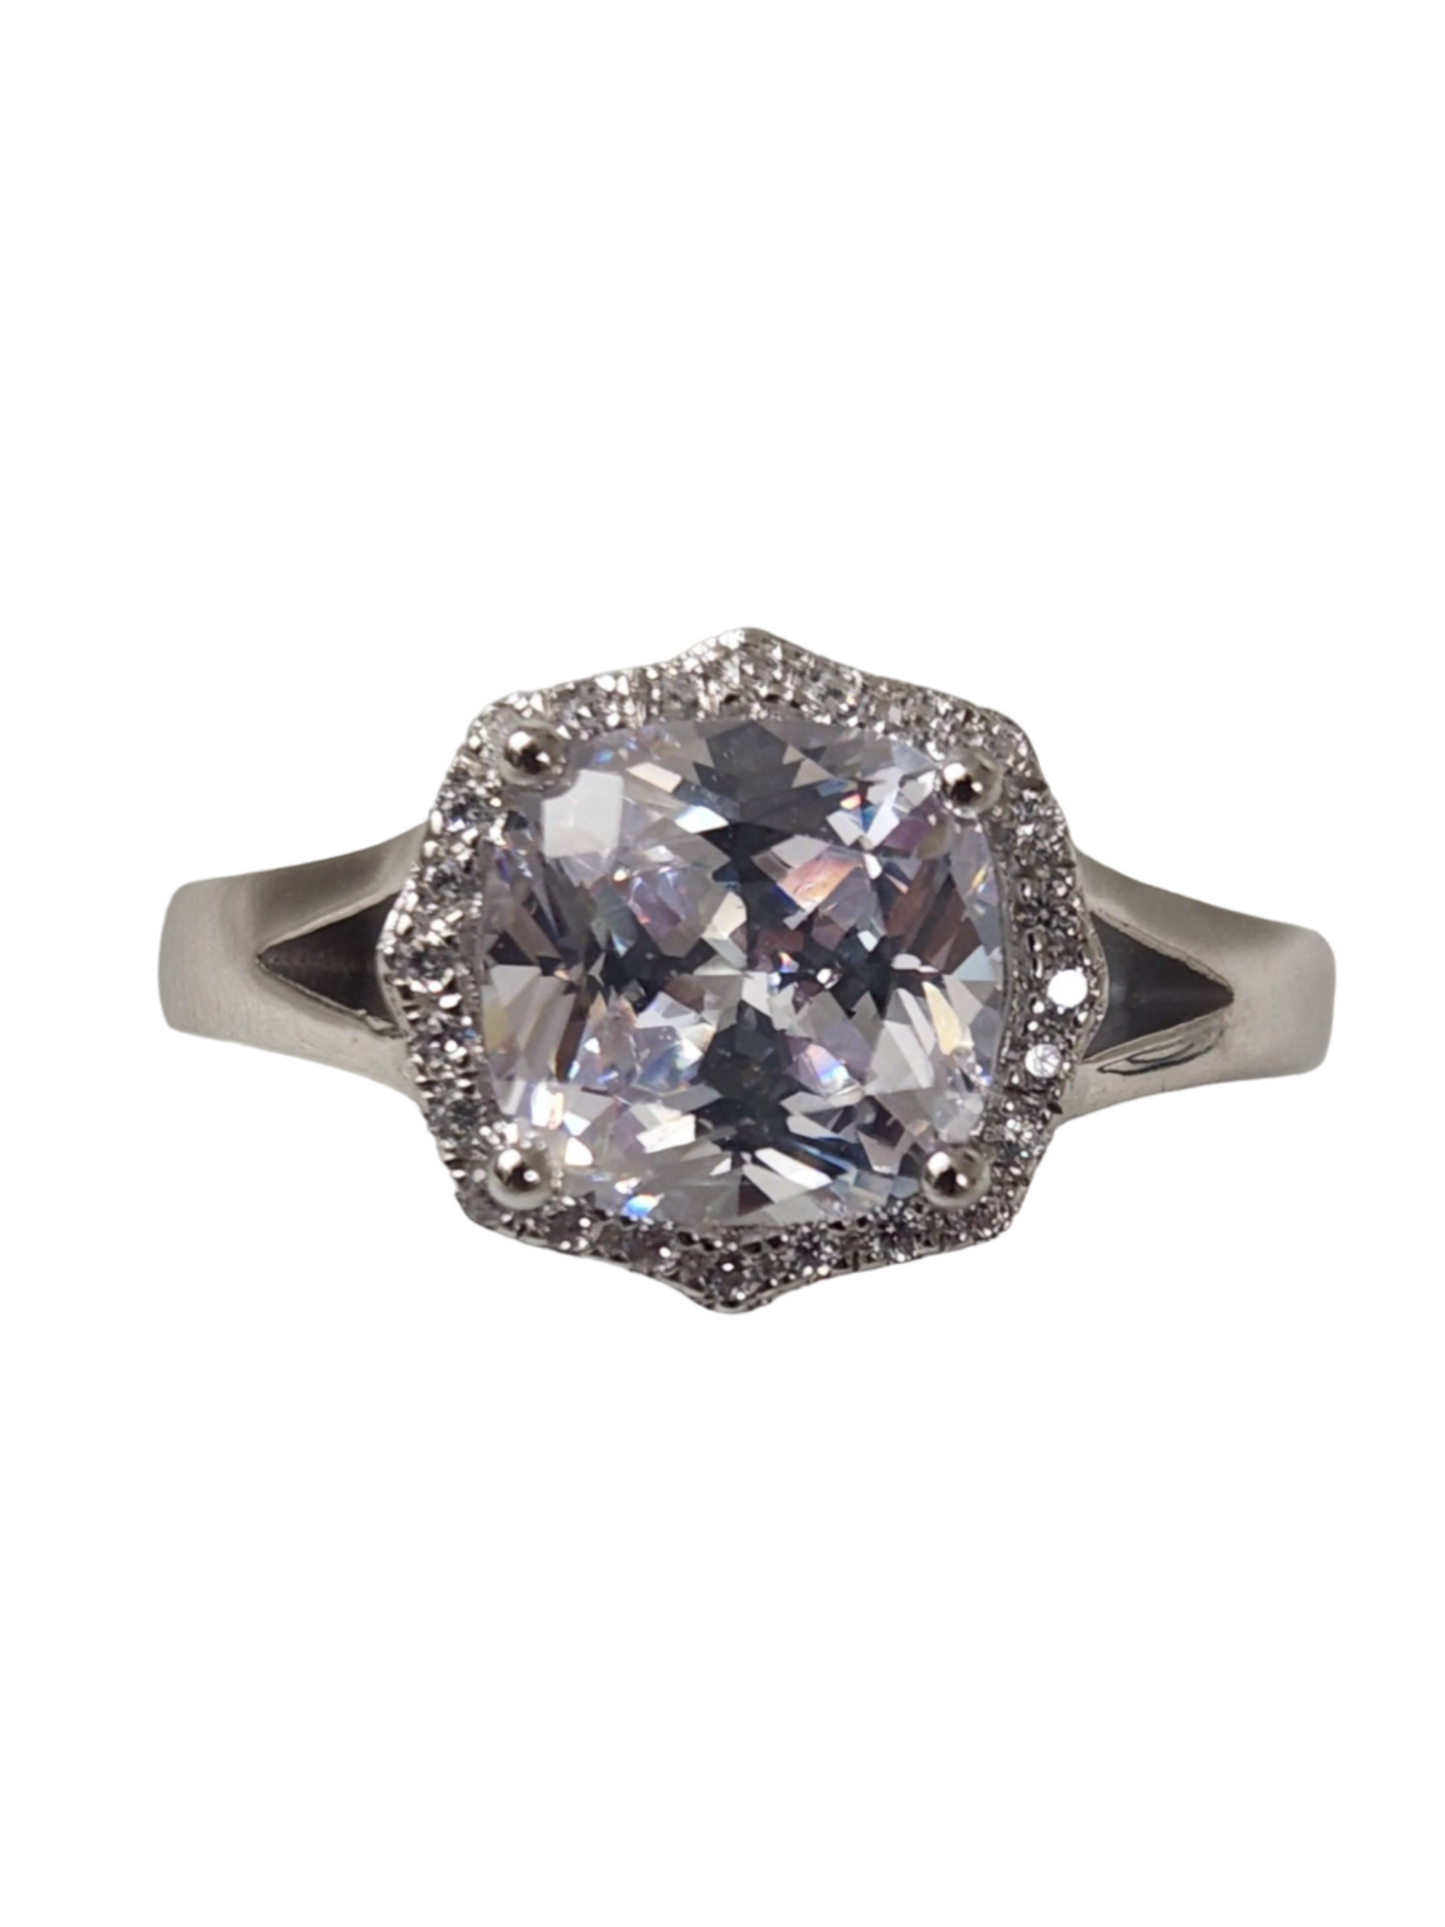 925 Sterling Silver 2.04ct 8mm Cushion CZ Vintage-Inspired Ring - The Ella